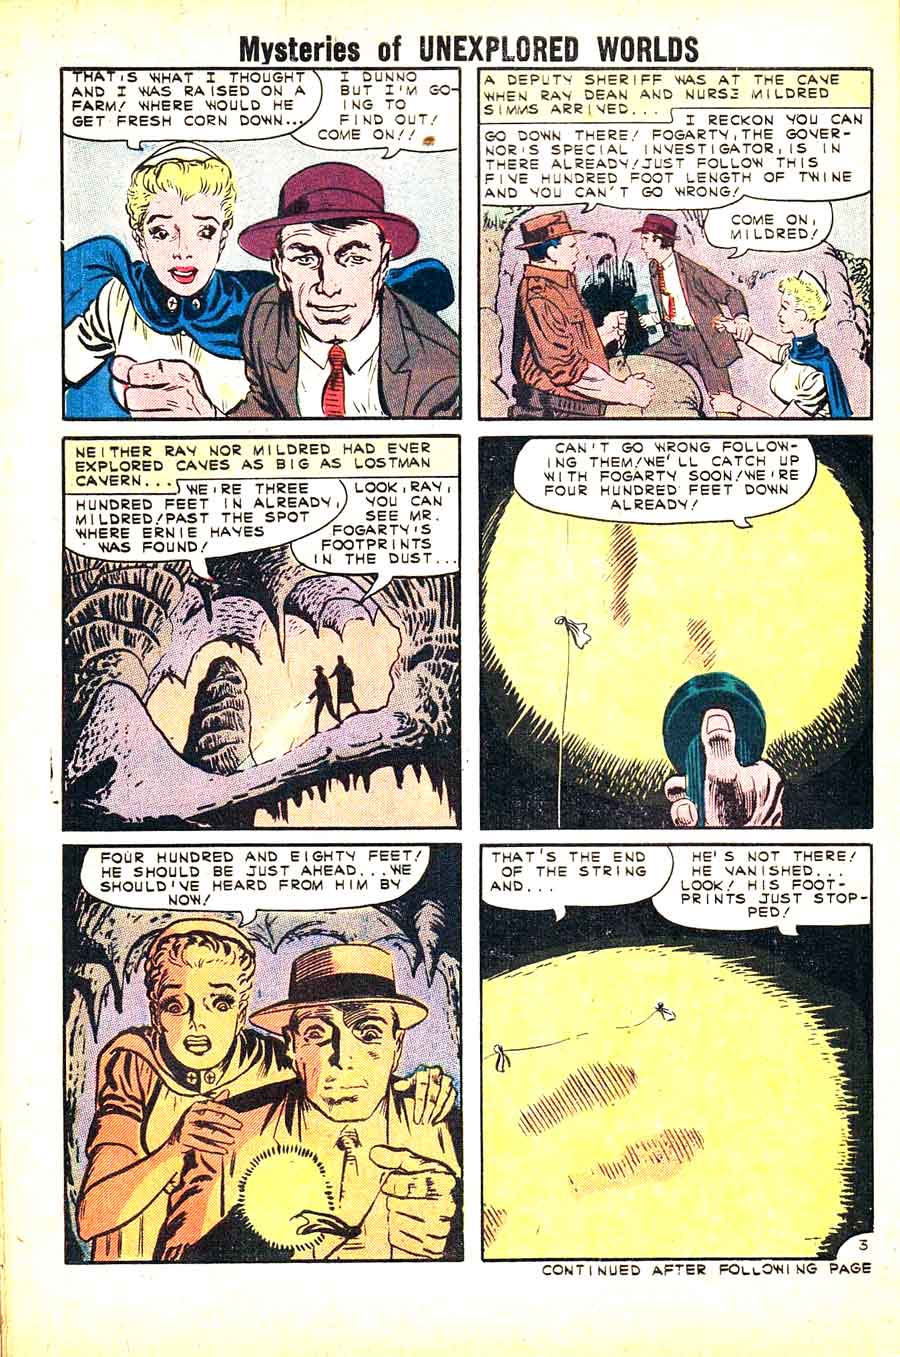 Mysteries of Unexplored Worlds #24 golden age science fiction charlton comic book page by Steve Ditko